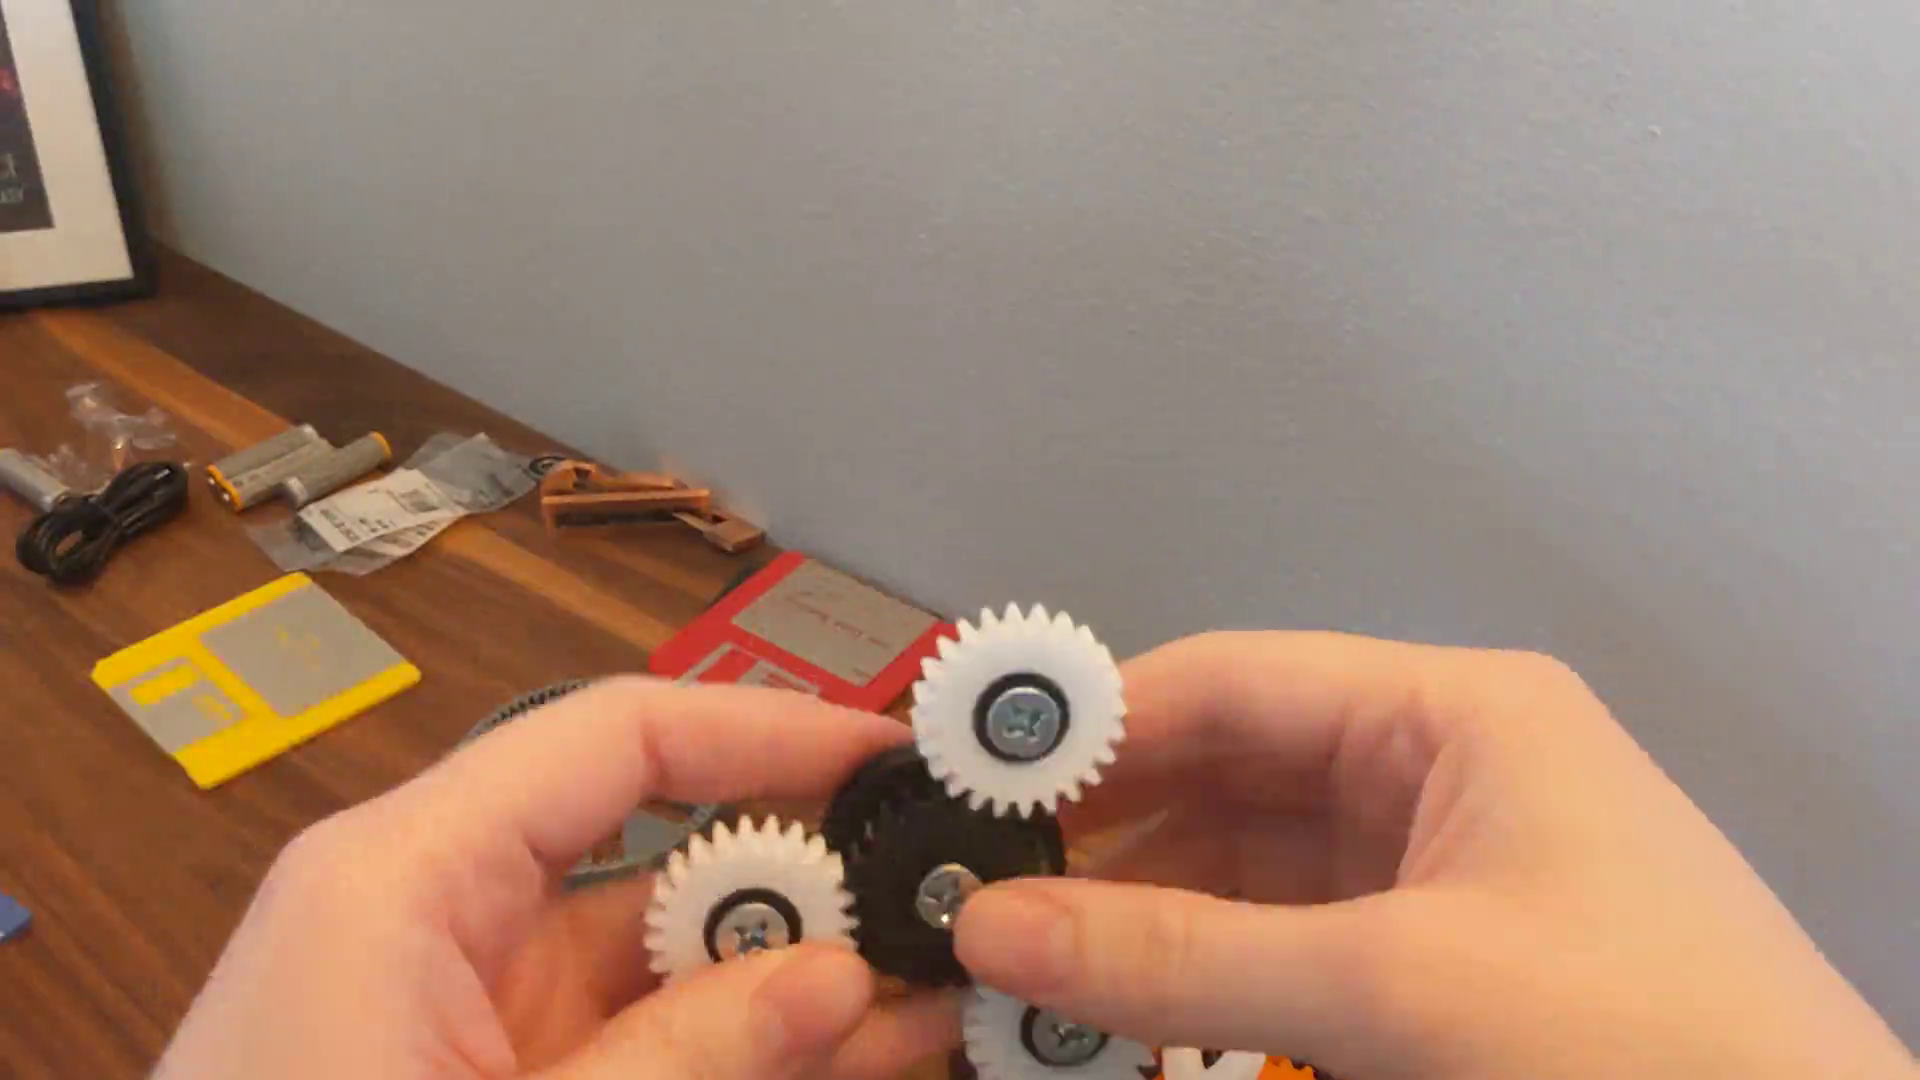 A planetary gear fidget spinner that I designed and 3d printed